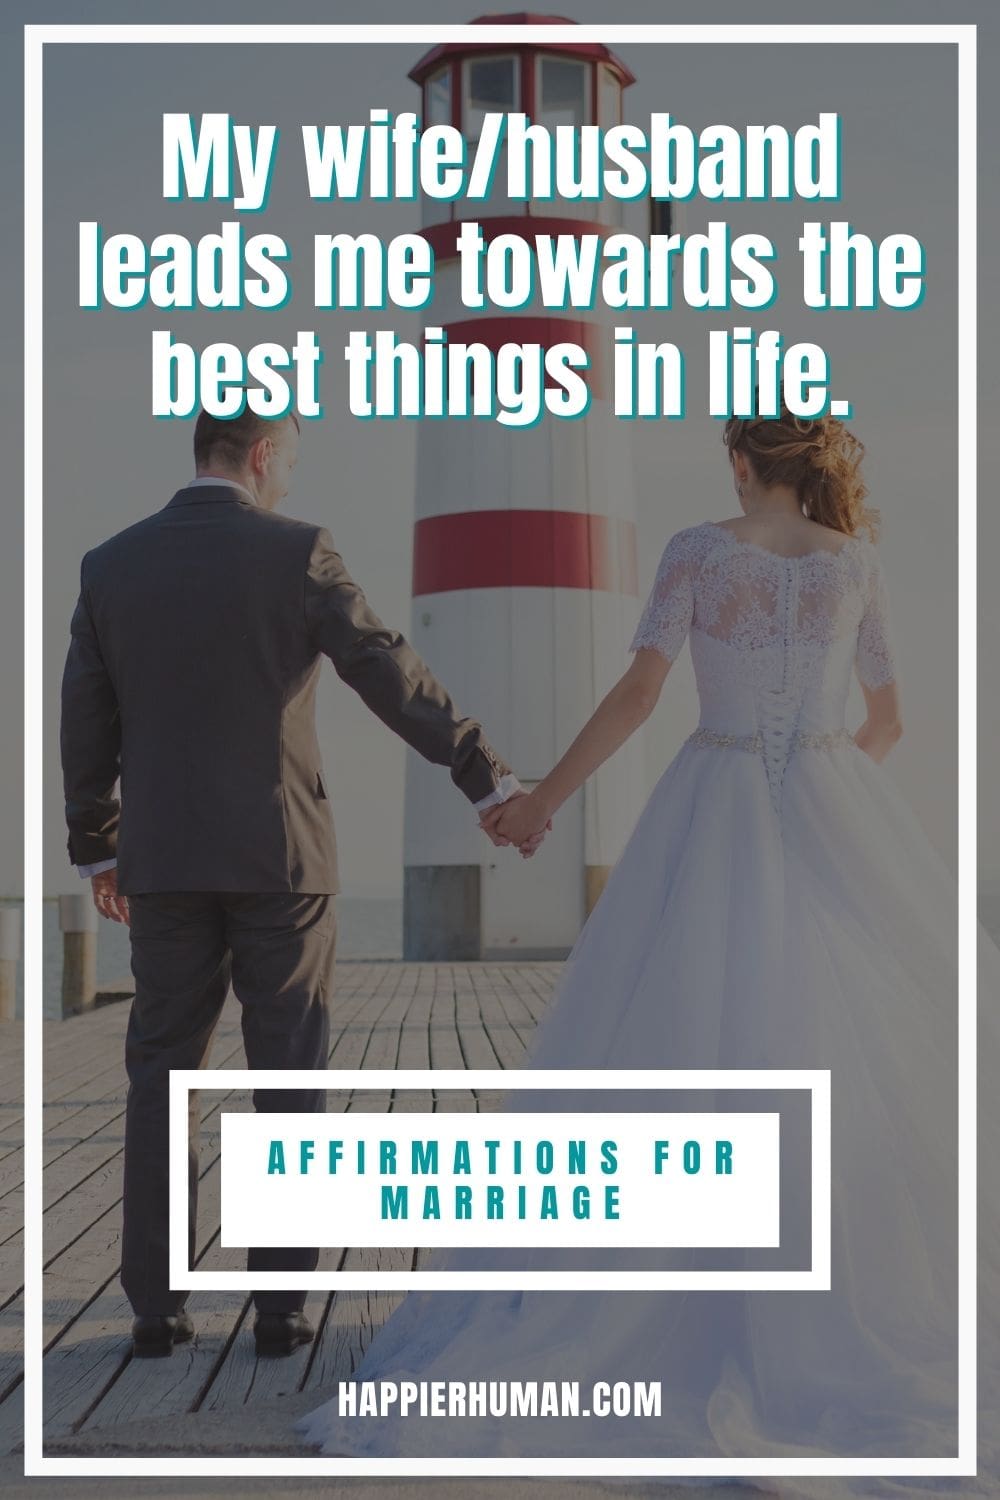 Affirmations for Marriage - My wife/husband leads me towards the best things in life. | biblical marriage affirmations | importance of affirmation in marriage | positive daily affirmations for marriage #postiveaffirmation #dailyaffirmations #affirmation